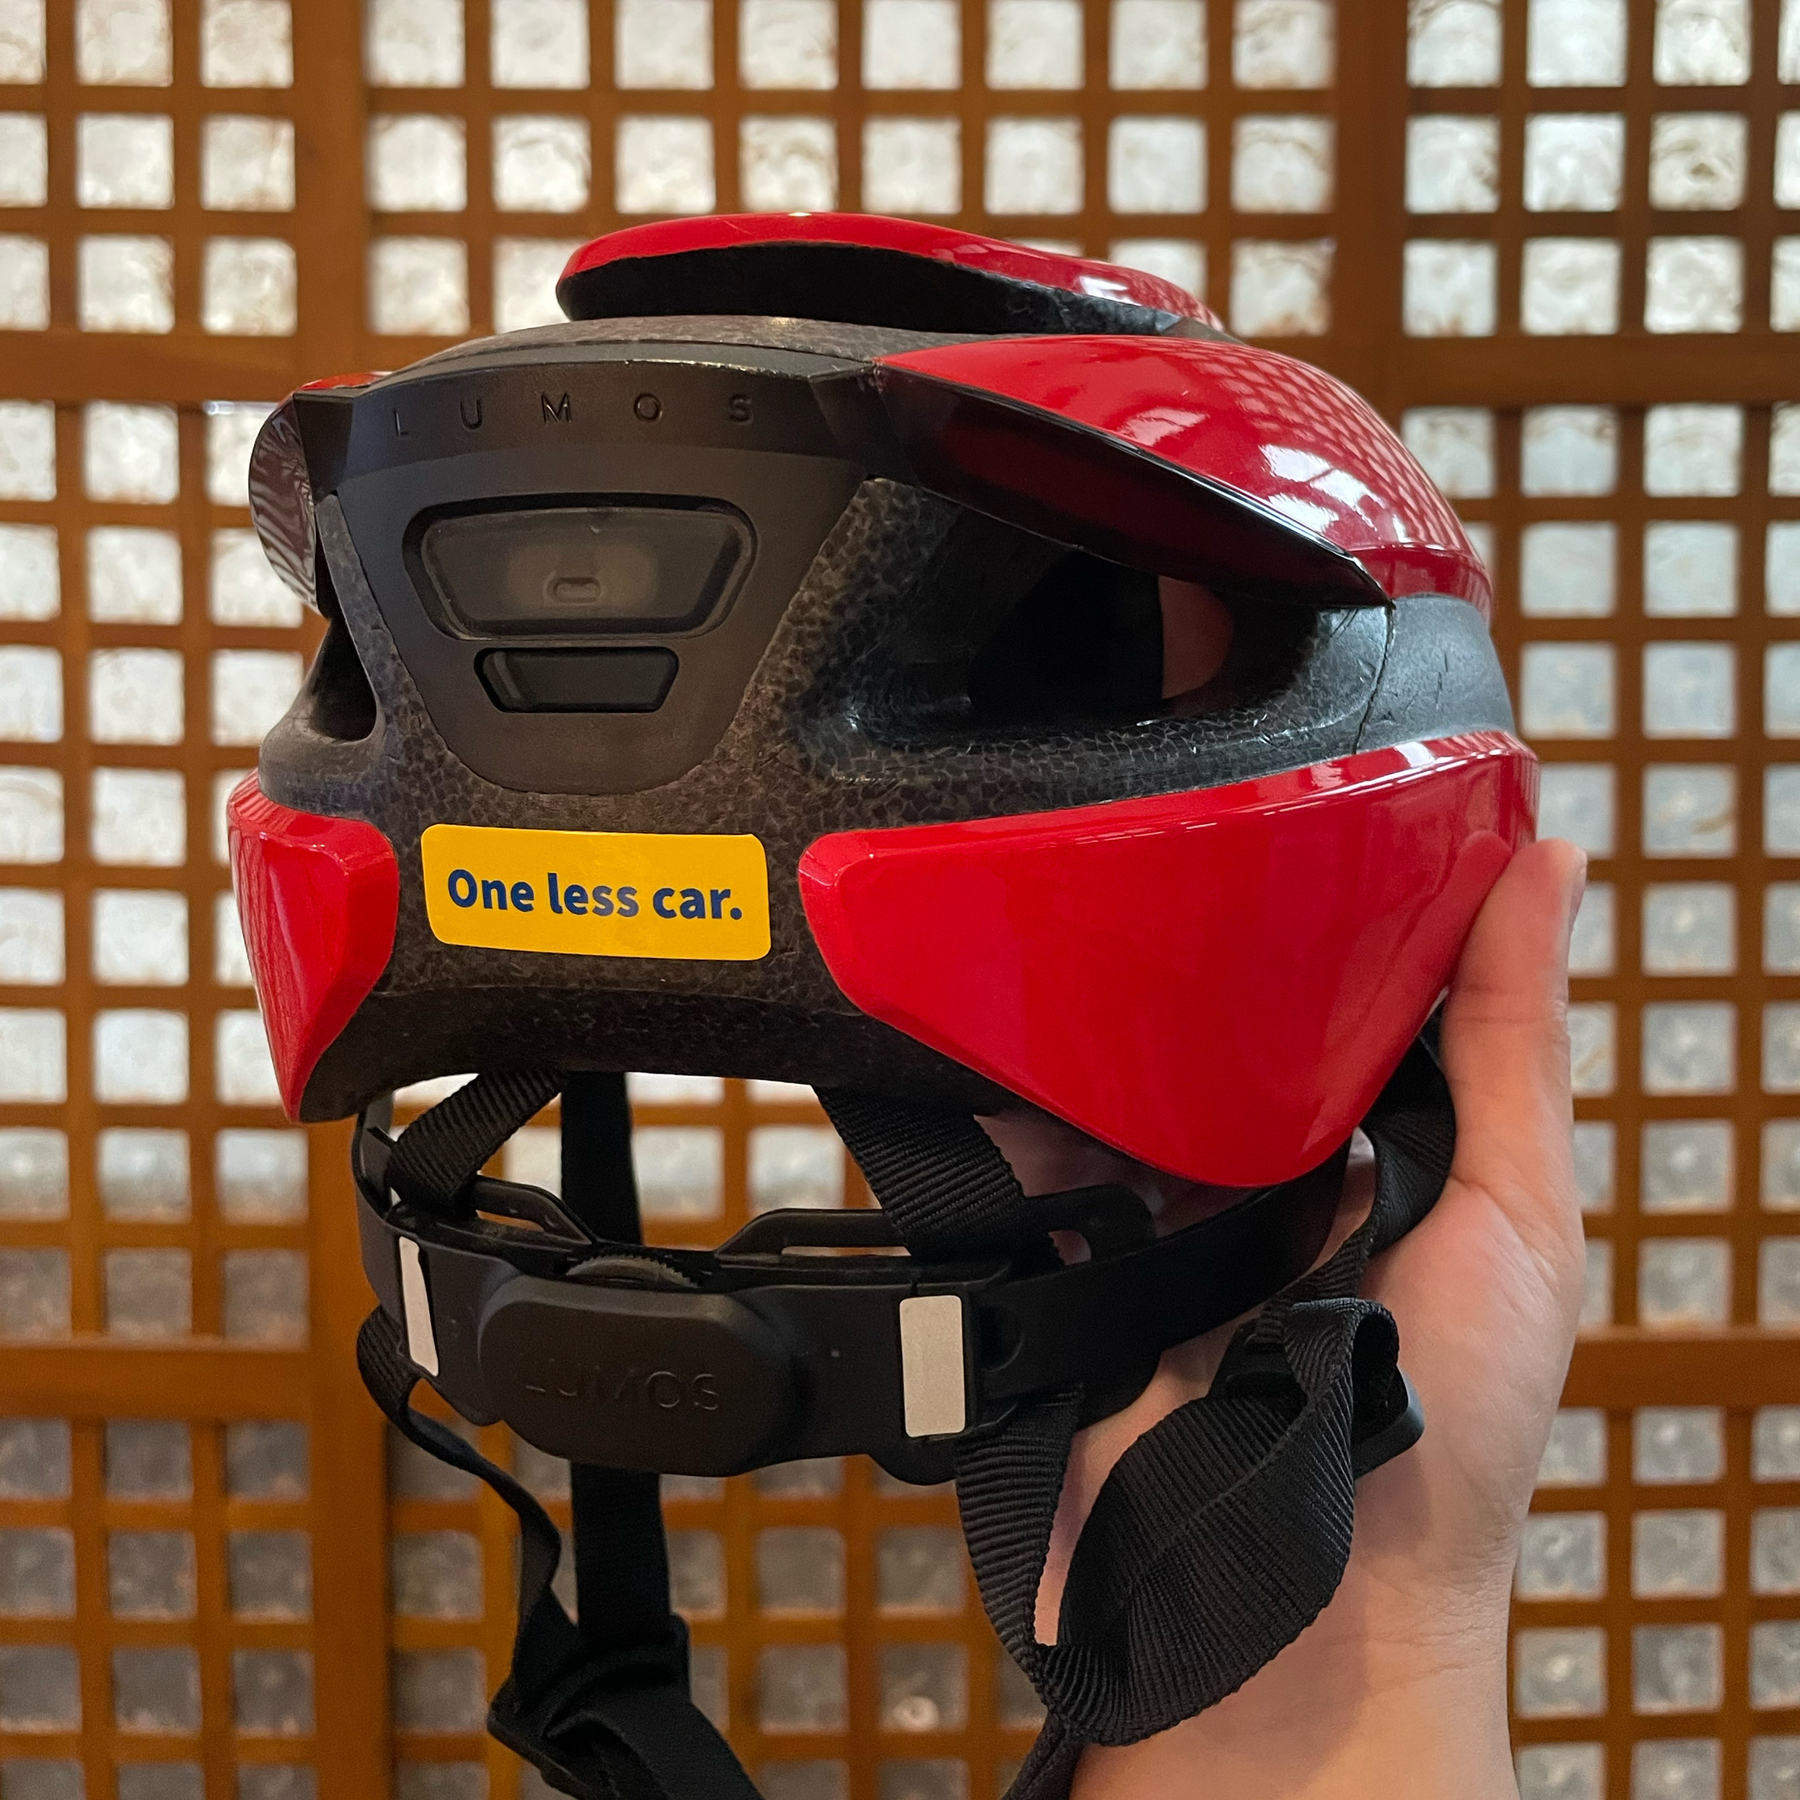 photo of the back of a red Lumos helmet, with the sticker “One less car” shown